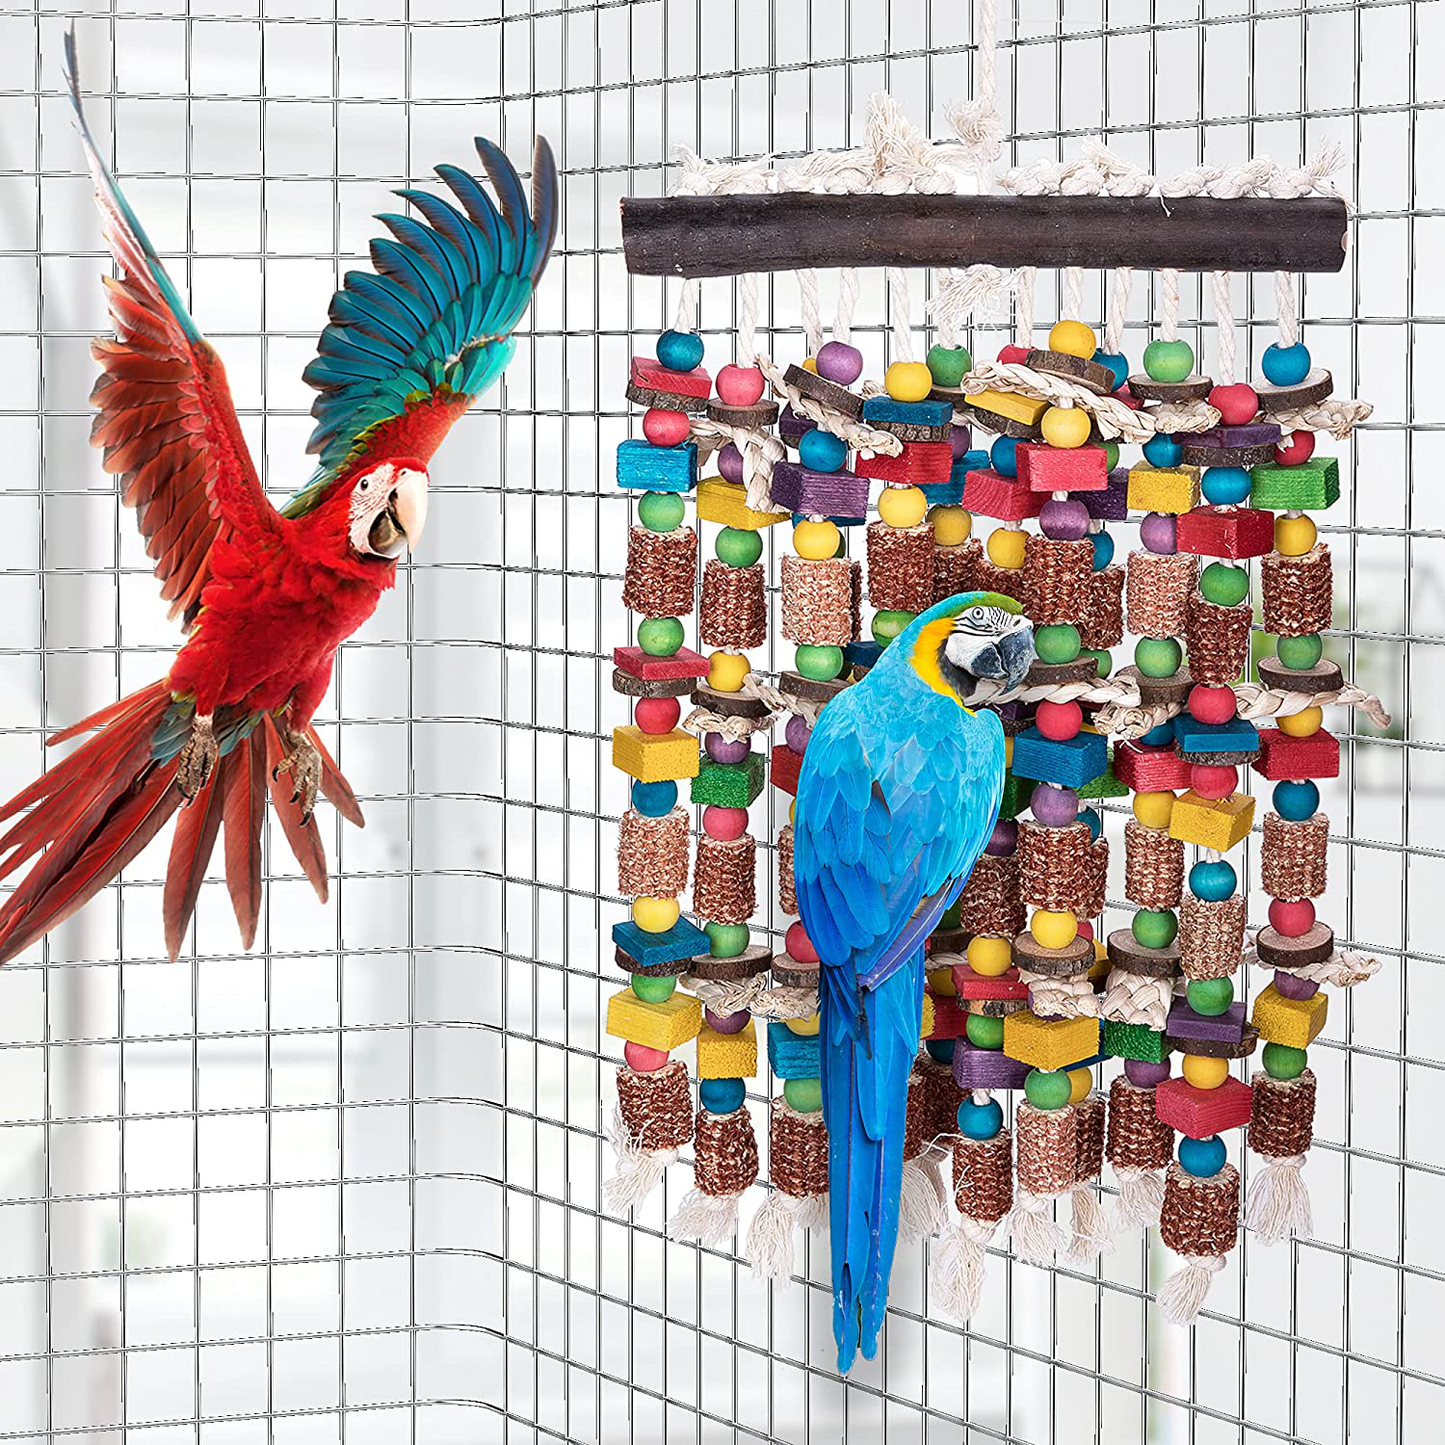 Wehhbtye Super Large Bird Parrot Macaw Chewing Toy-27''X11'' Multicolor Natural Wood Block Knot Bird Bite Tearing Toy,Parrot Corn Cob Chewing Toy for Macaws Cokatoos,African Grey,All Amazona Parrot